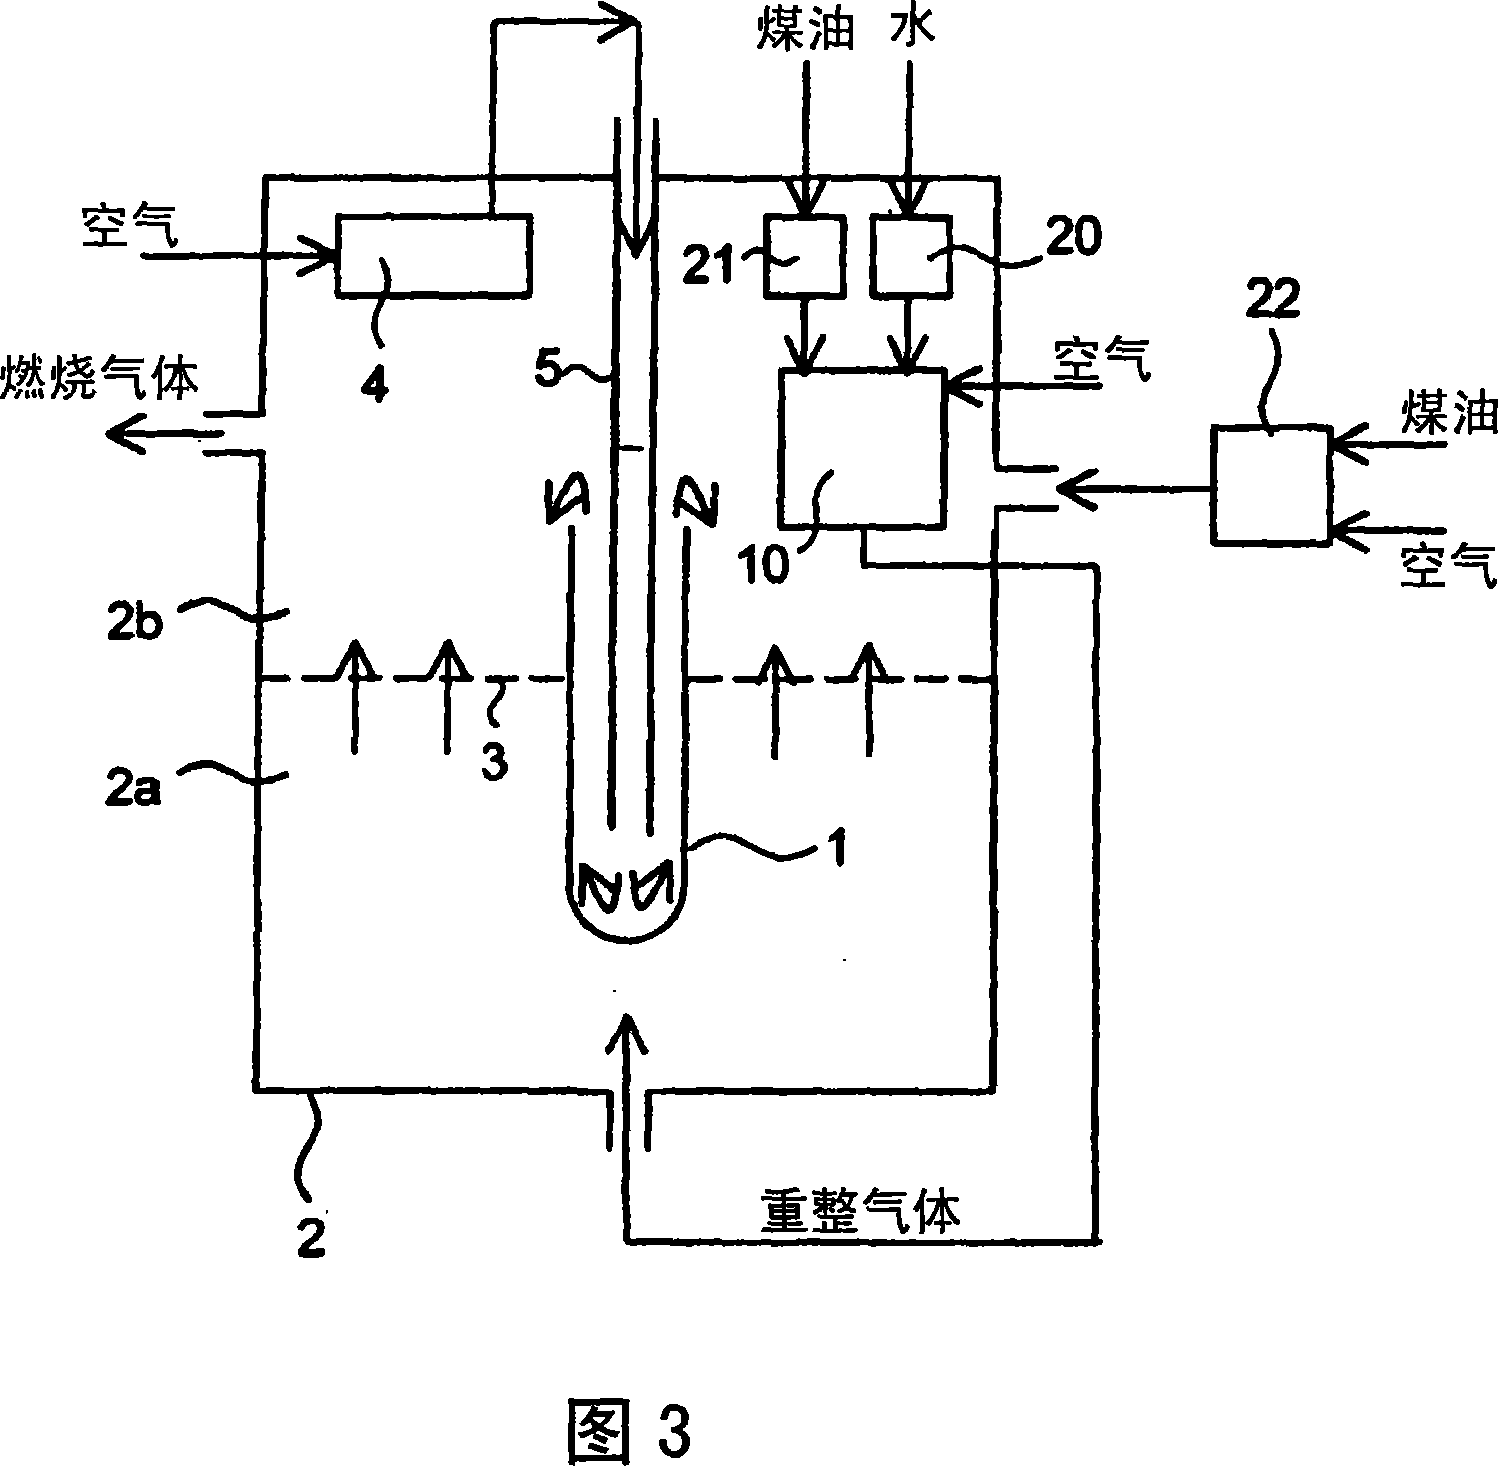 Method of starting solid oxide fuel cell system